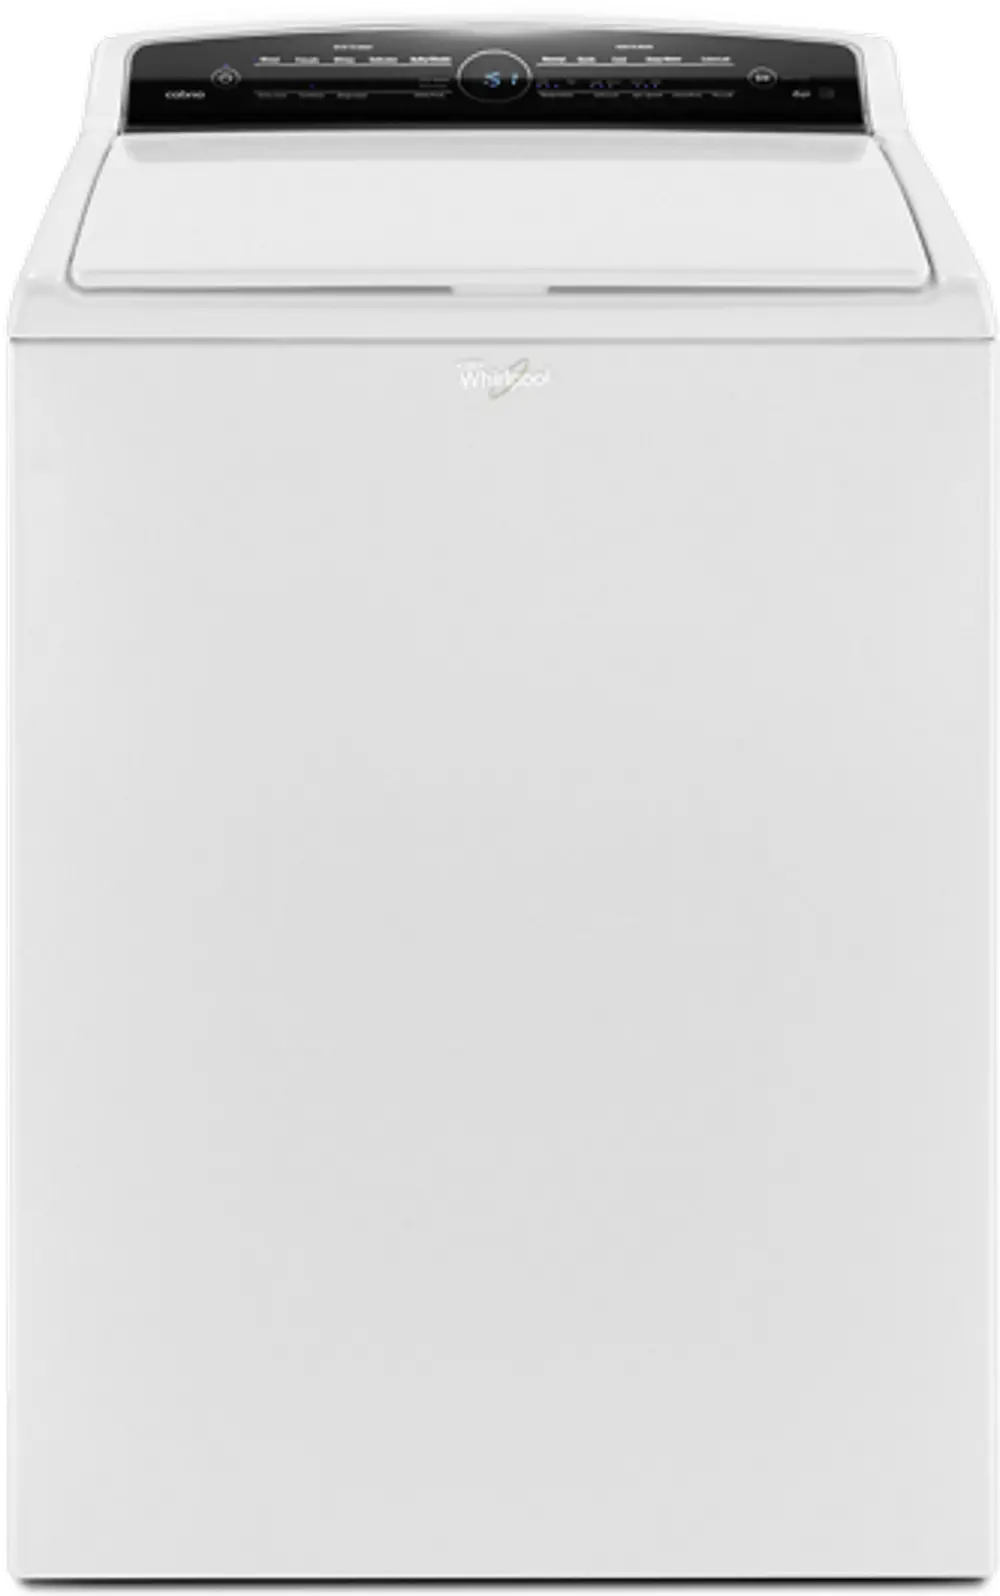 WTW7000DW Whirlpool 4.8 cu. ft. Top Load Washer - White-1